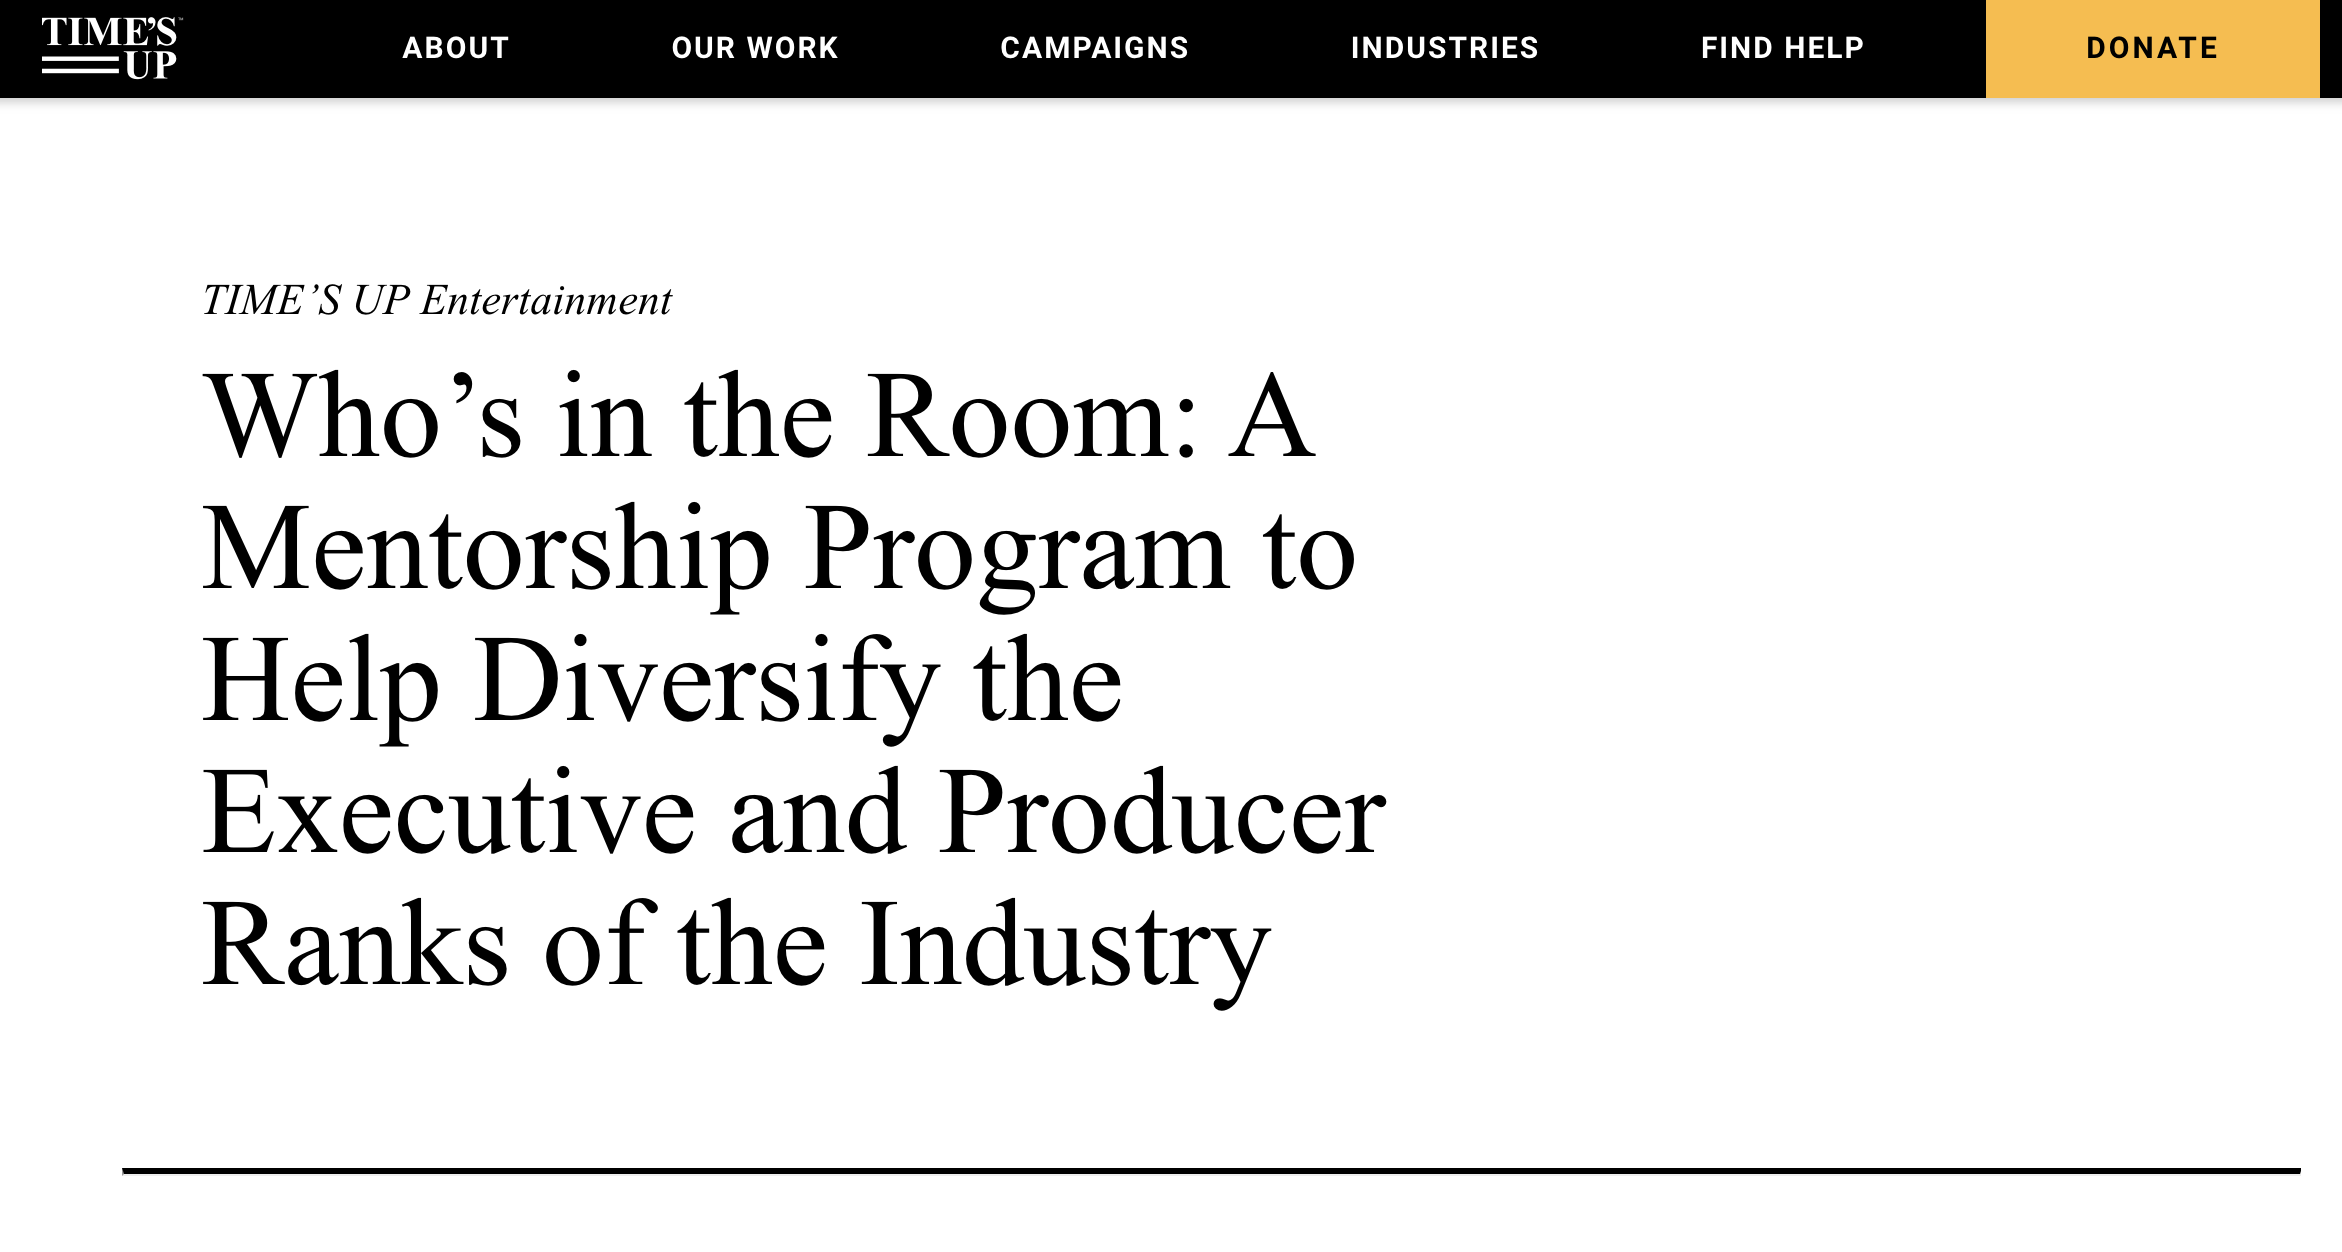 TIME’S UP Entertainment  Who’s in the Room: A Mentorship Program to Help Diversify the Executive and Producer Ranks of the Industry